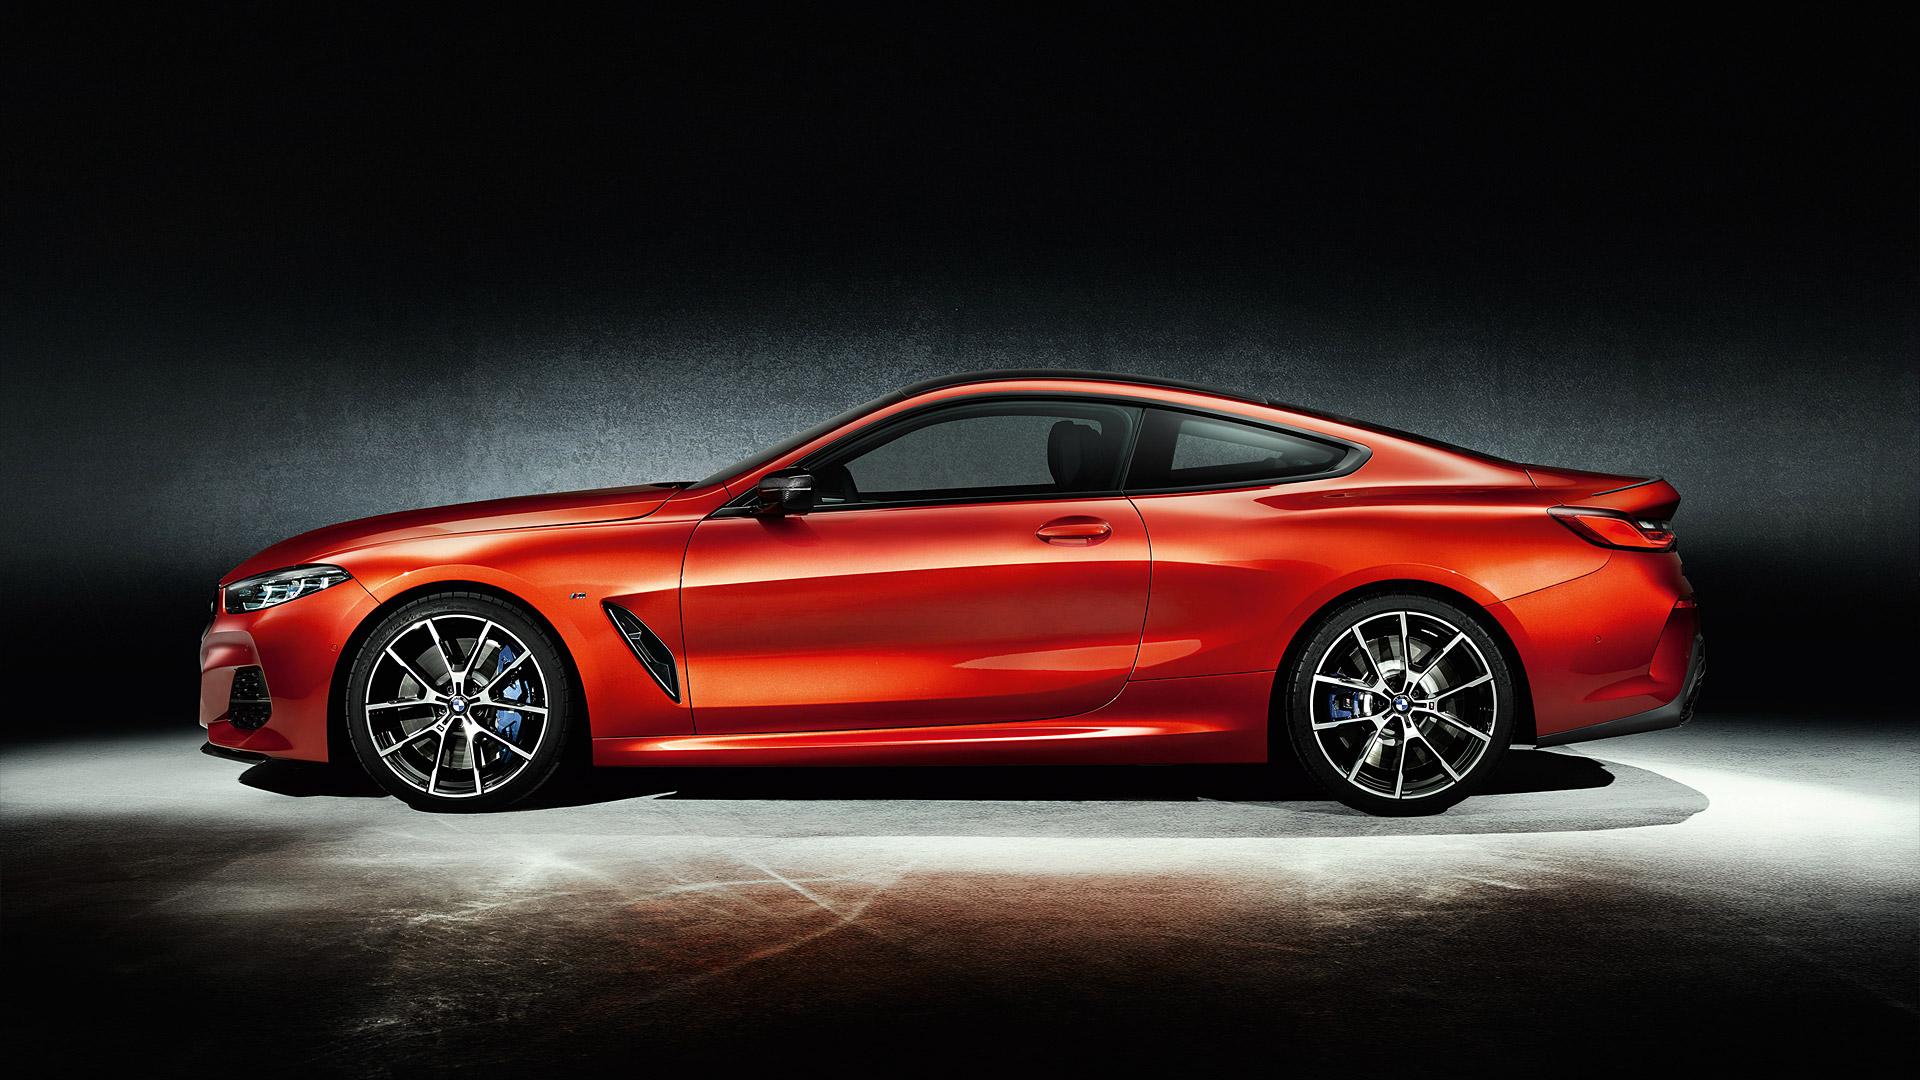 BMW 8 Series Coupe Wallpaper & HD Image